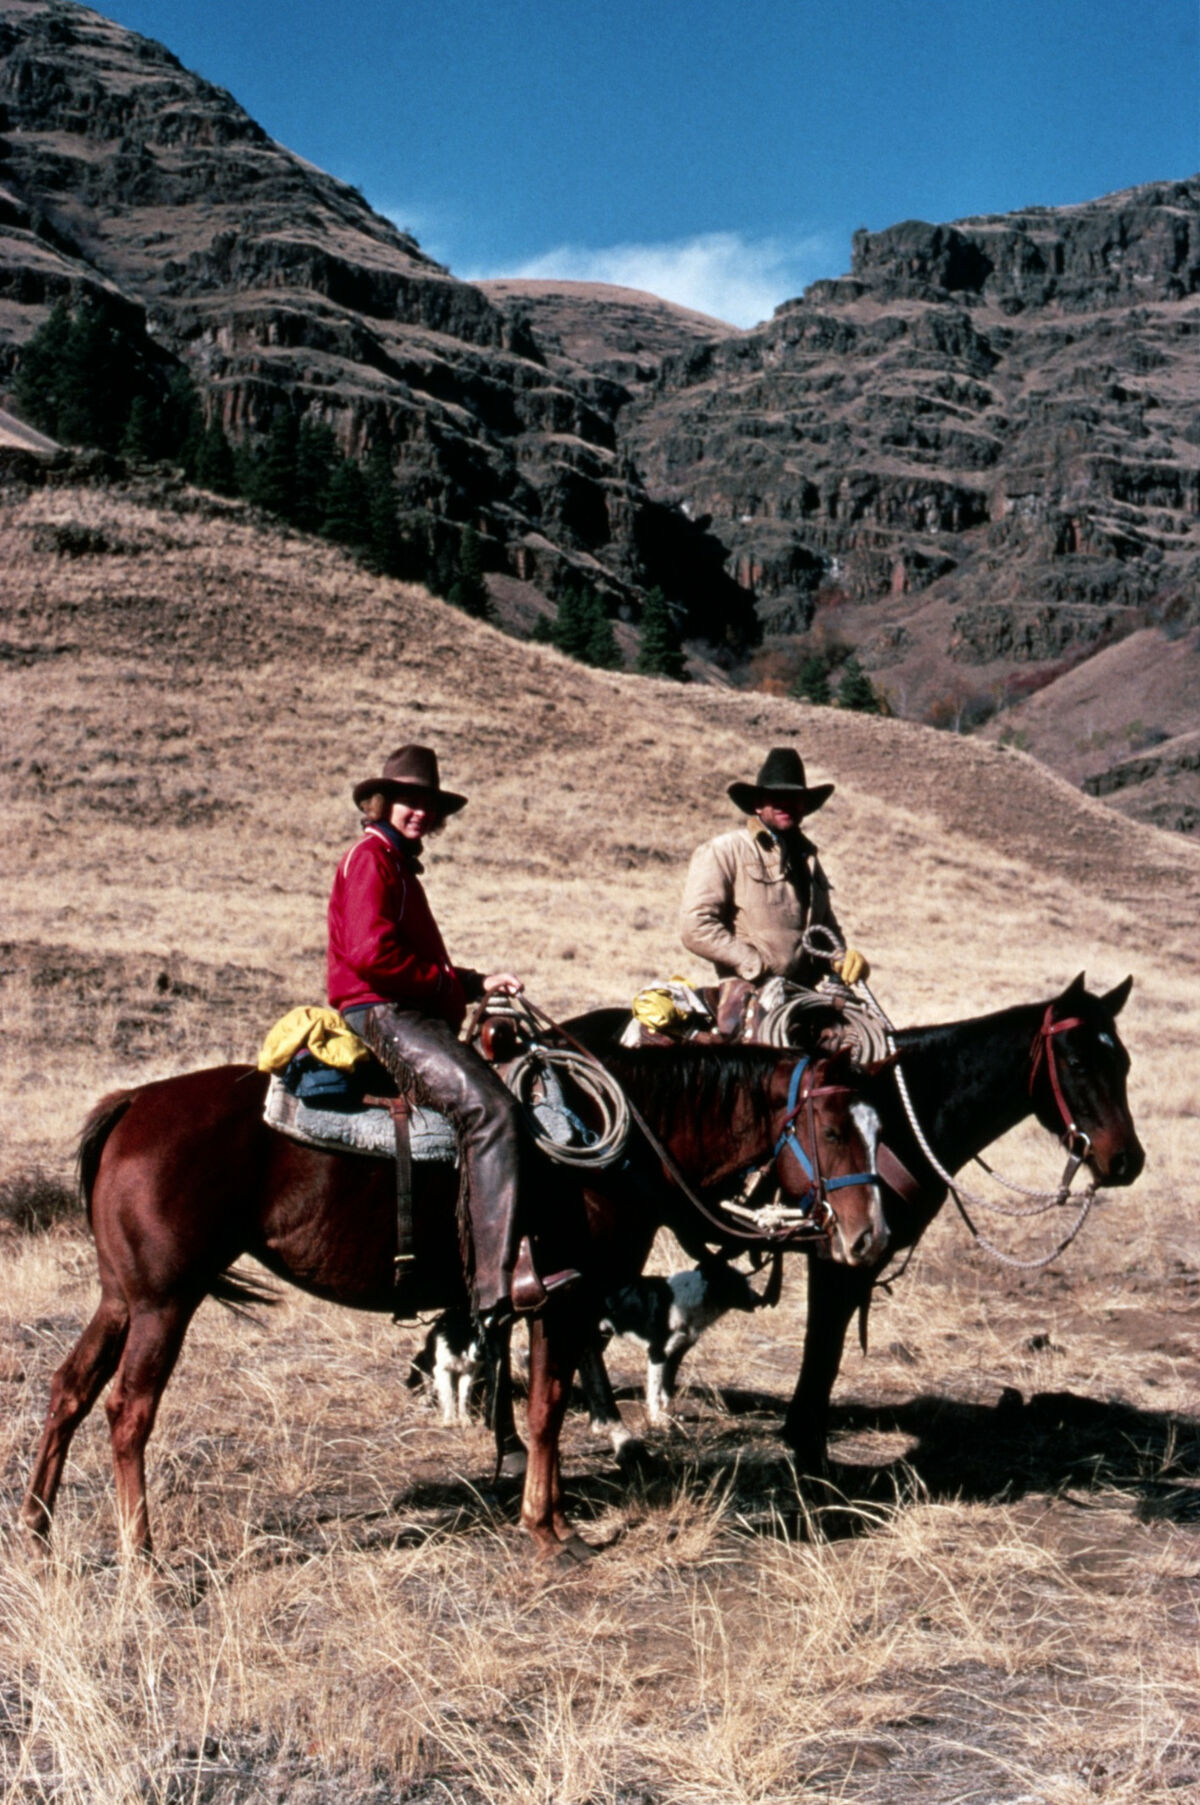 Dave and Mona Glauss ride on the lower Imnaha near Horse Creek. Taken by Janie Tippett.